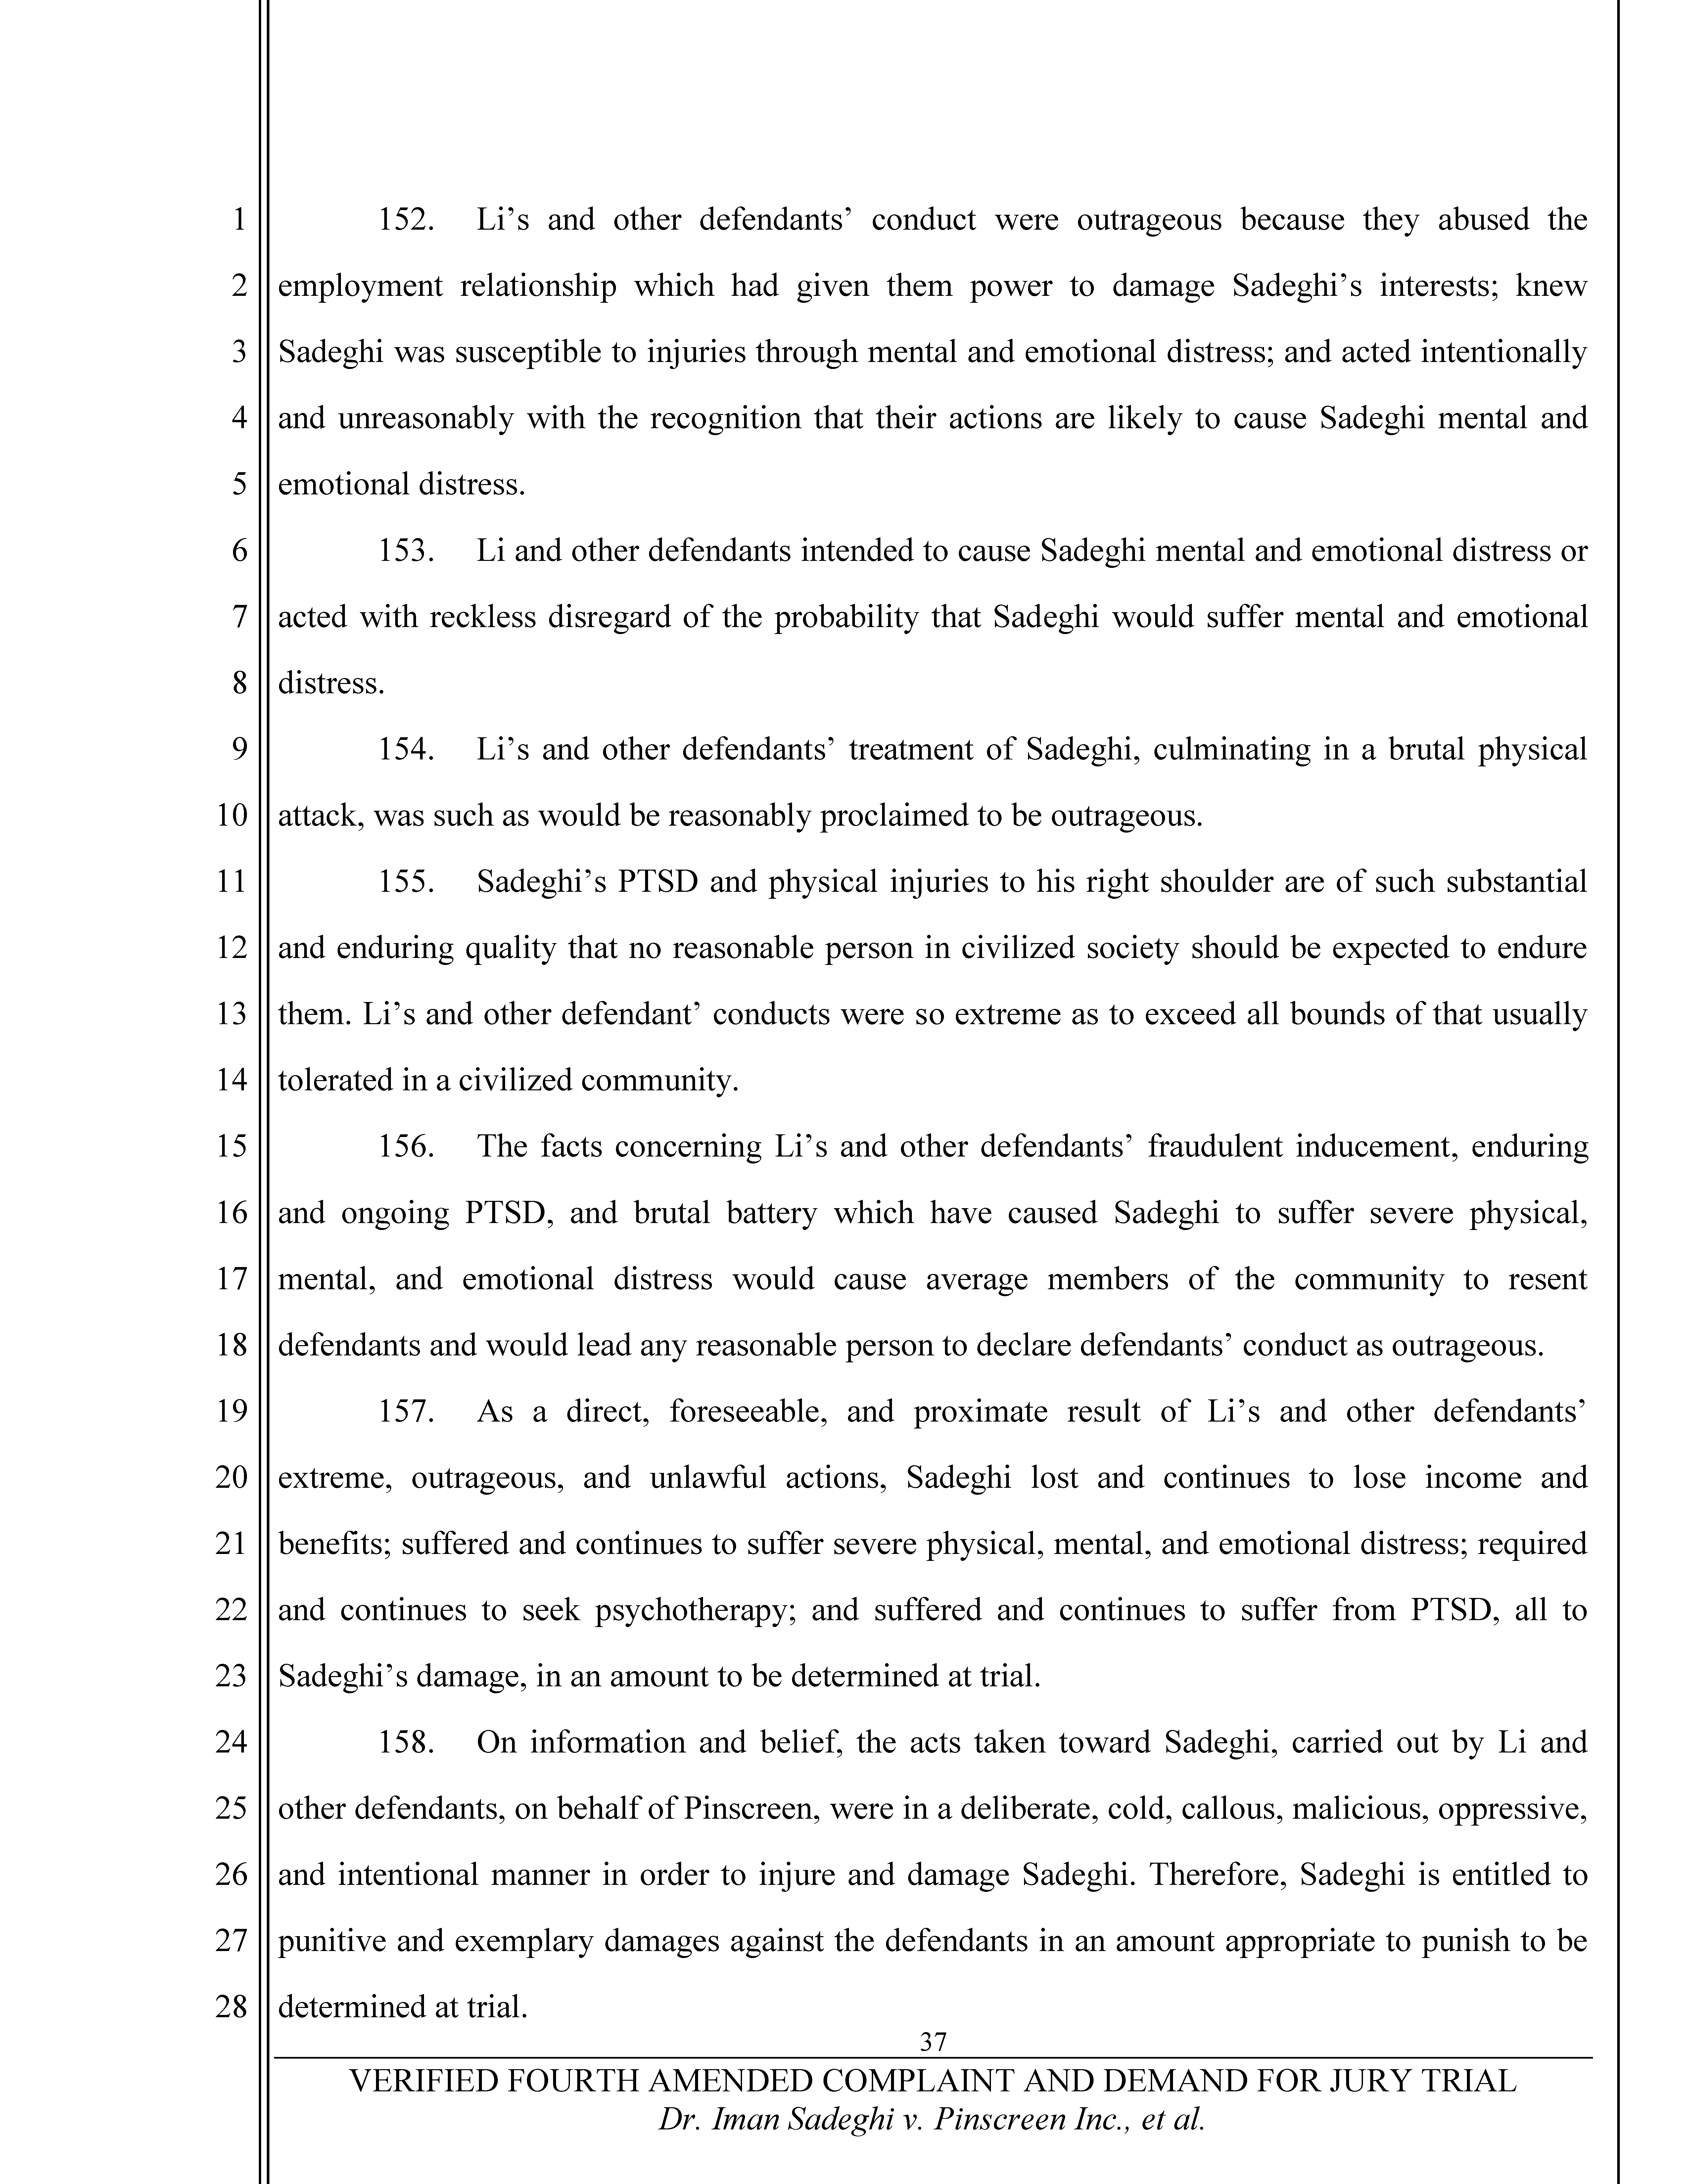 Fourth Amended Complaint (4AC) Page 38